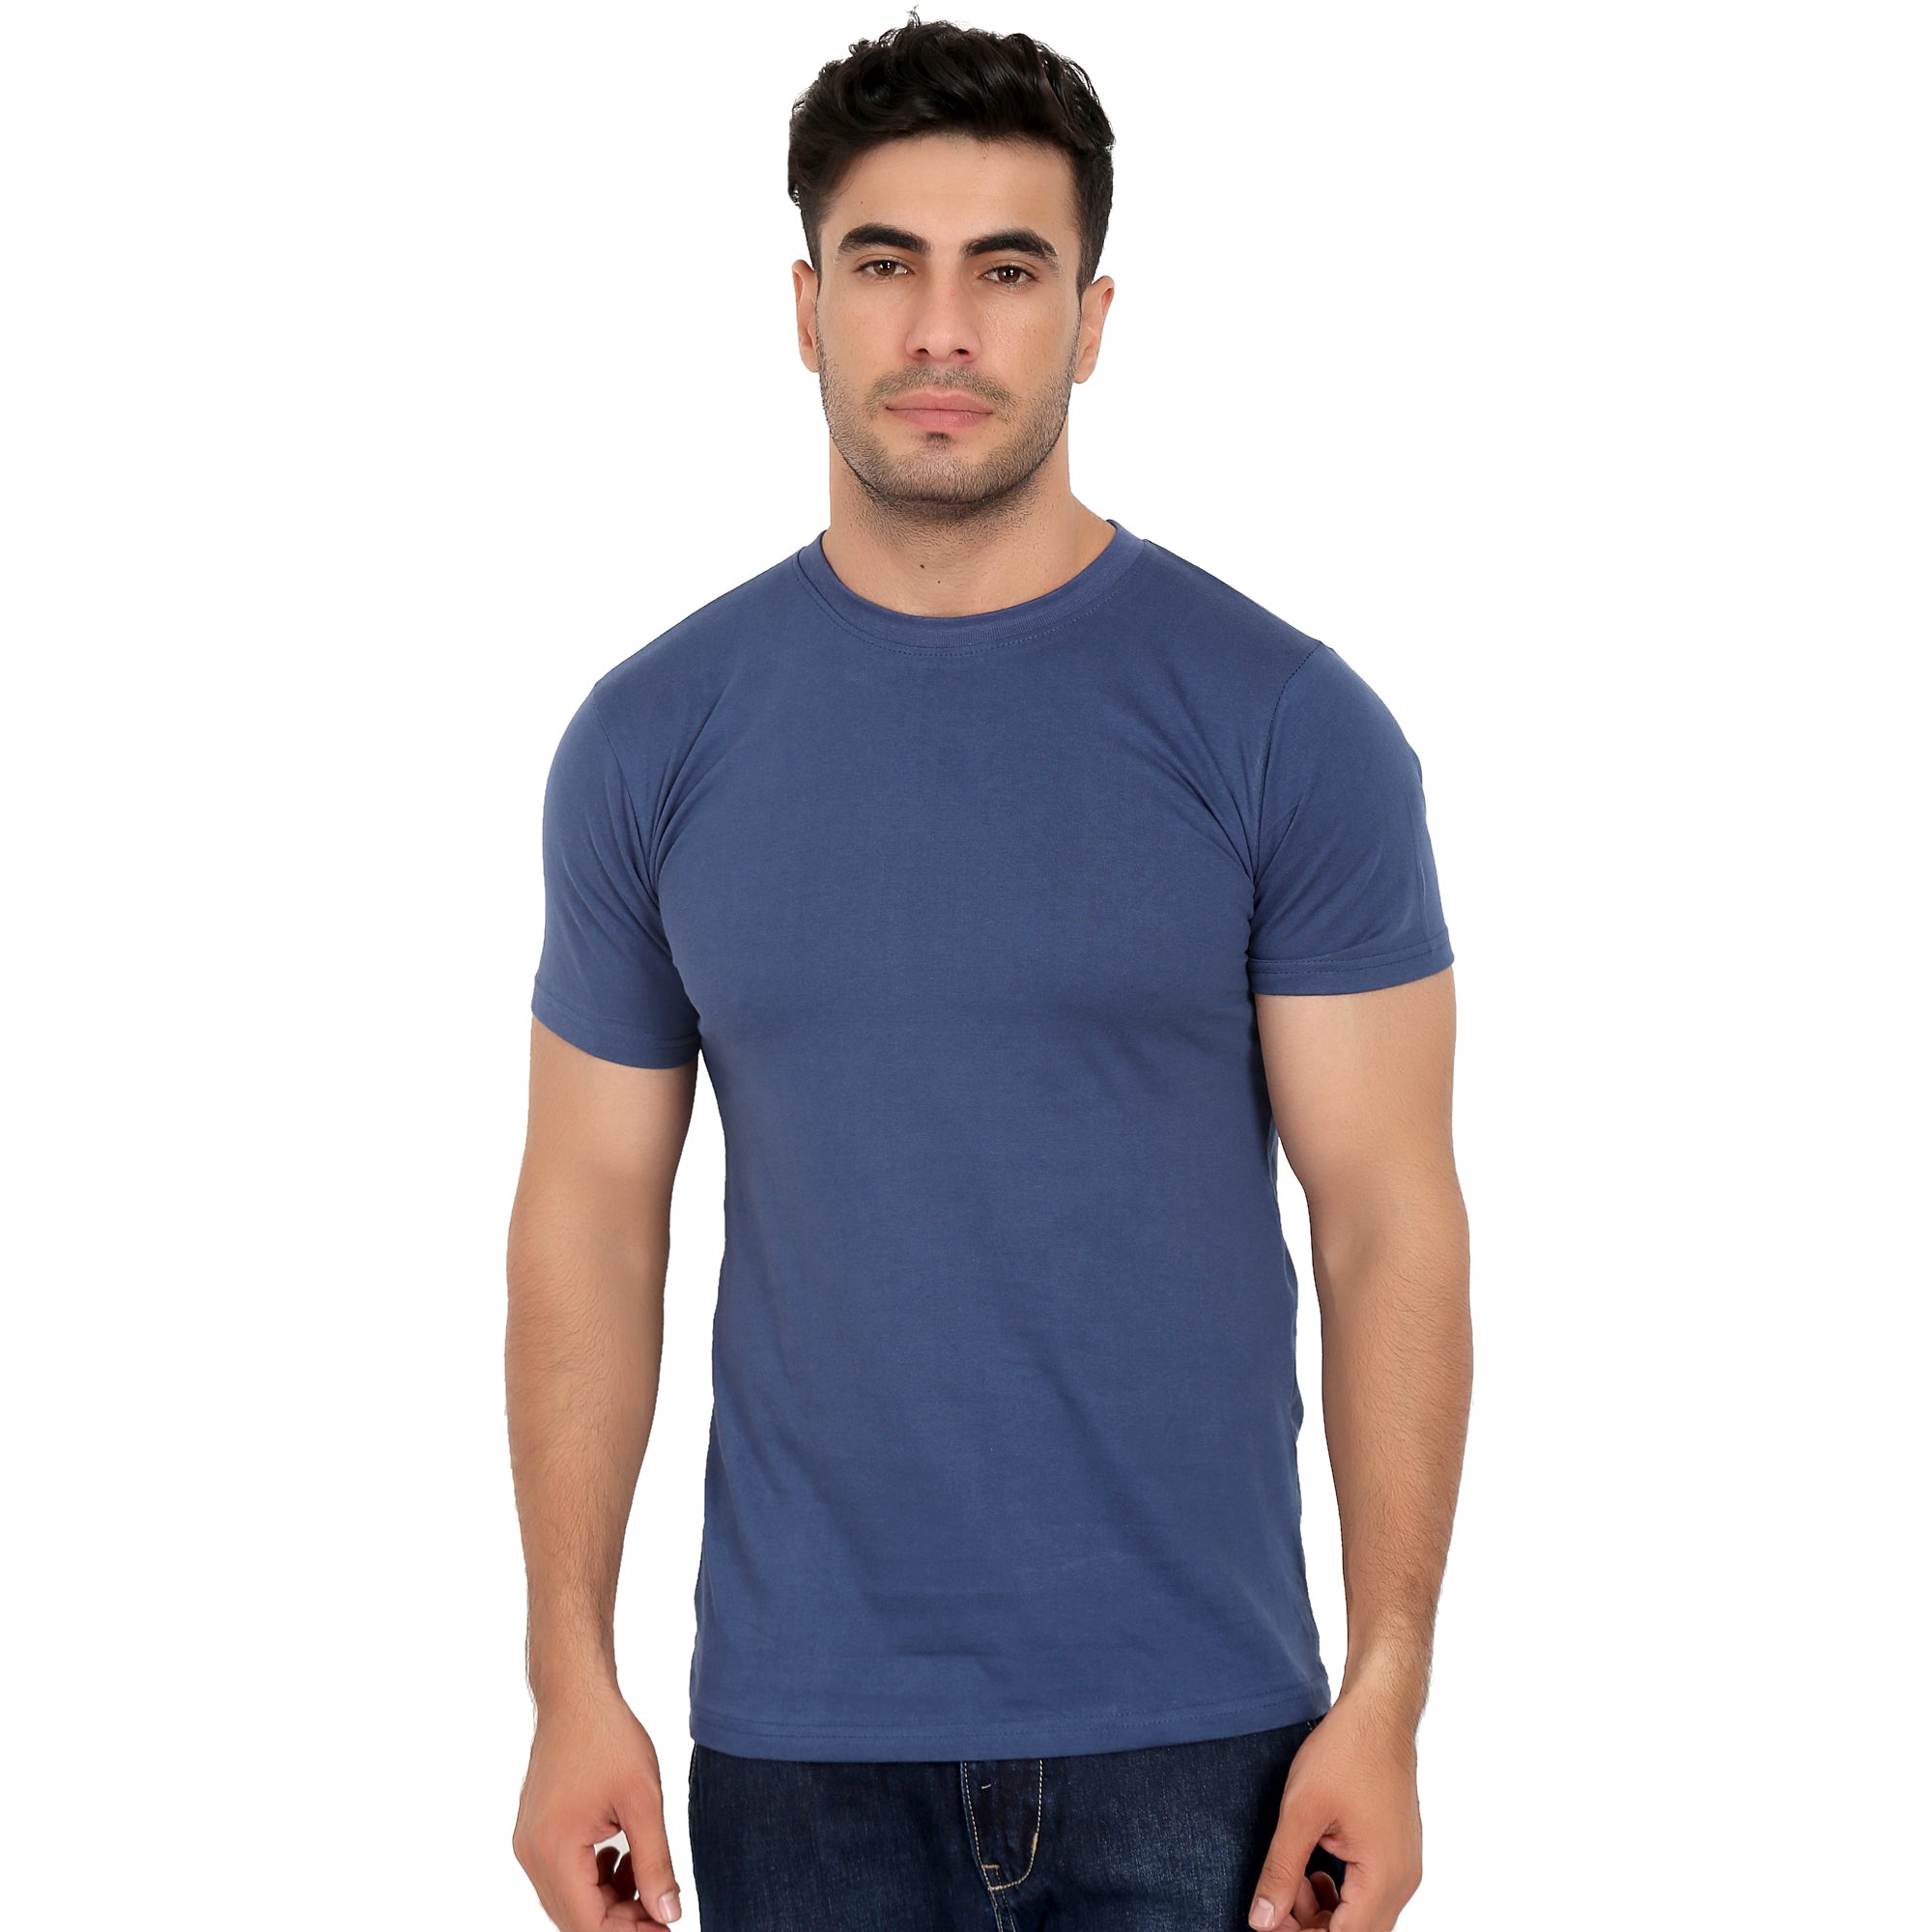 Combo Offer - Men Crew Neck Cotton T-Shirts - Half Sleeves - 3 Colors - Red, Blue & White